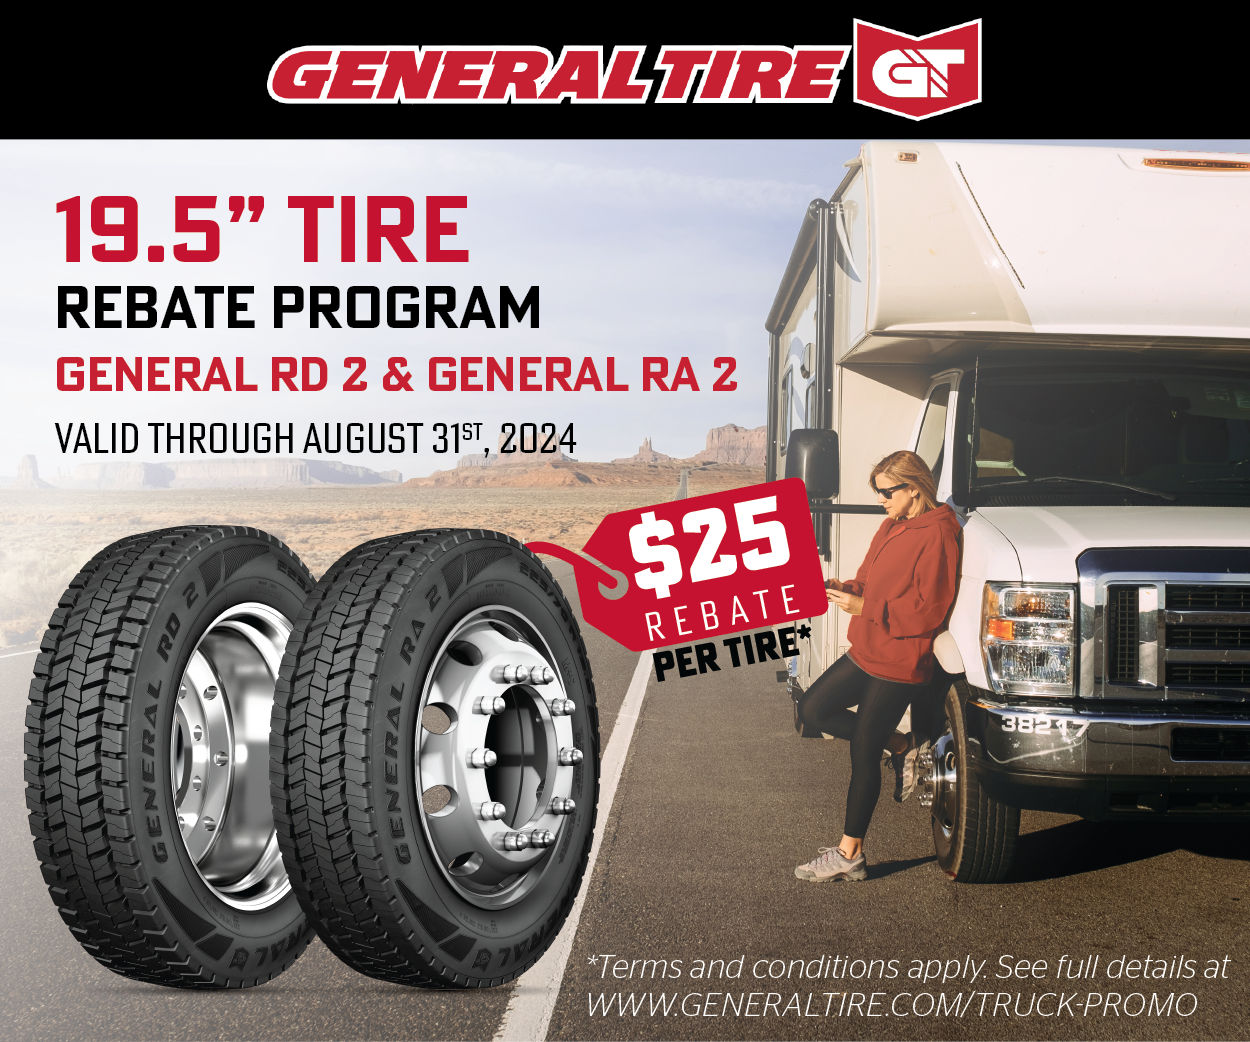 General Tire Announces Summer Rebate Promotion for 19.5 Tires